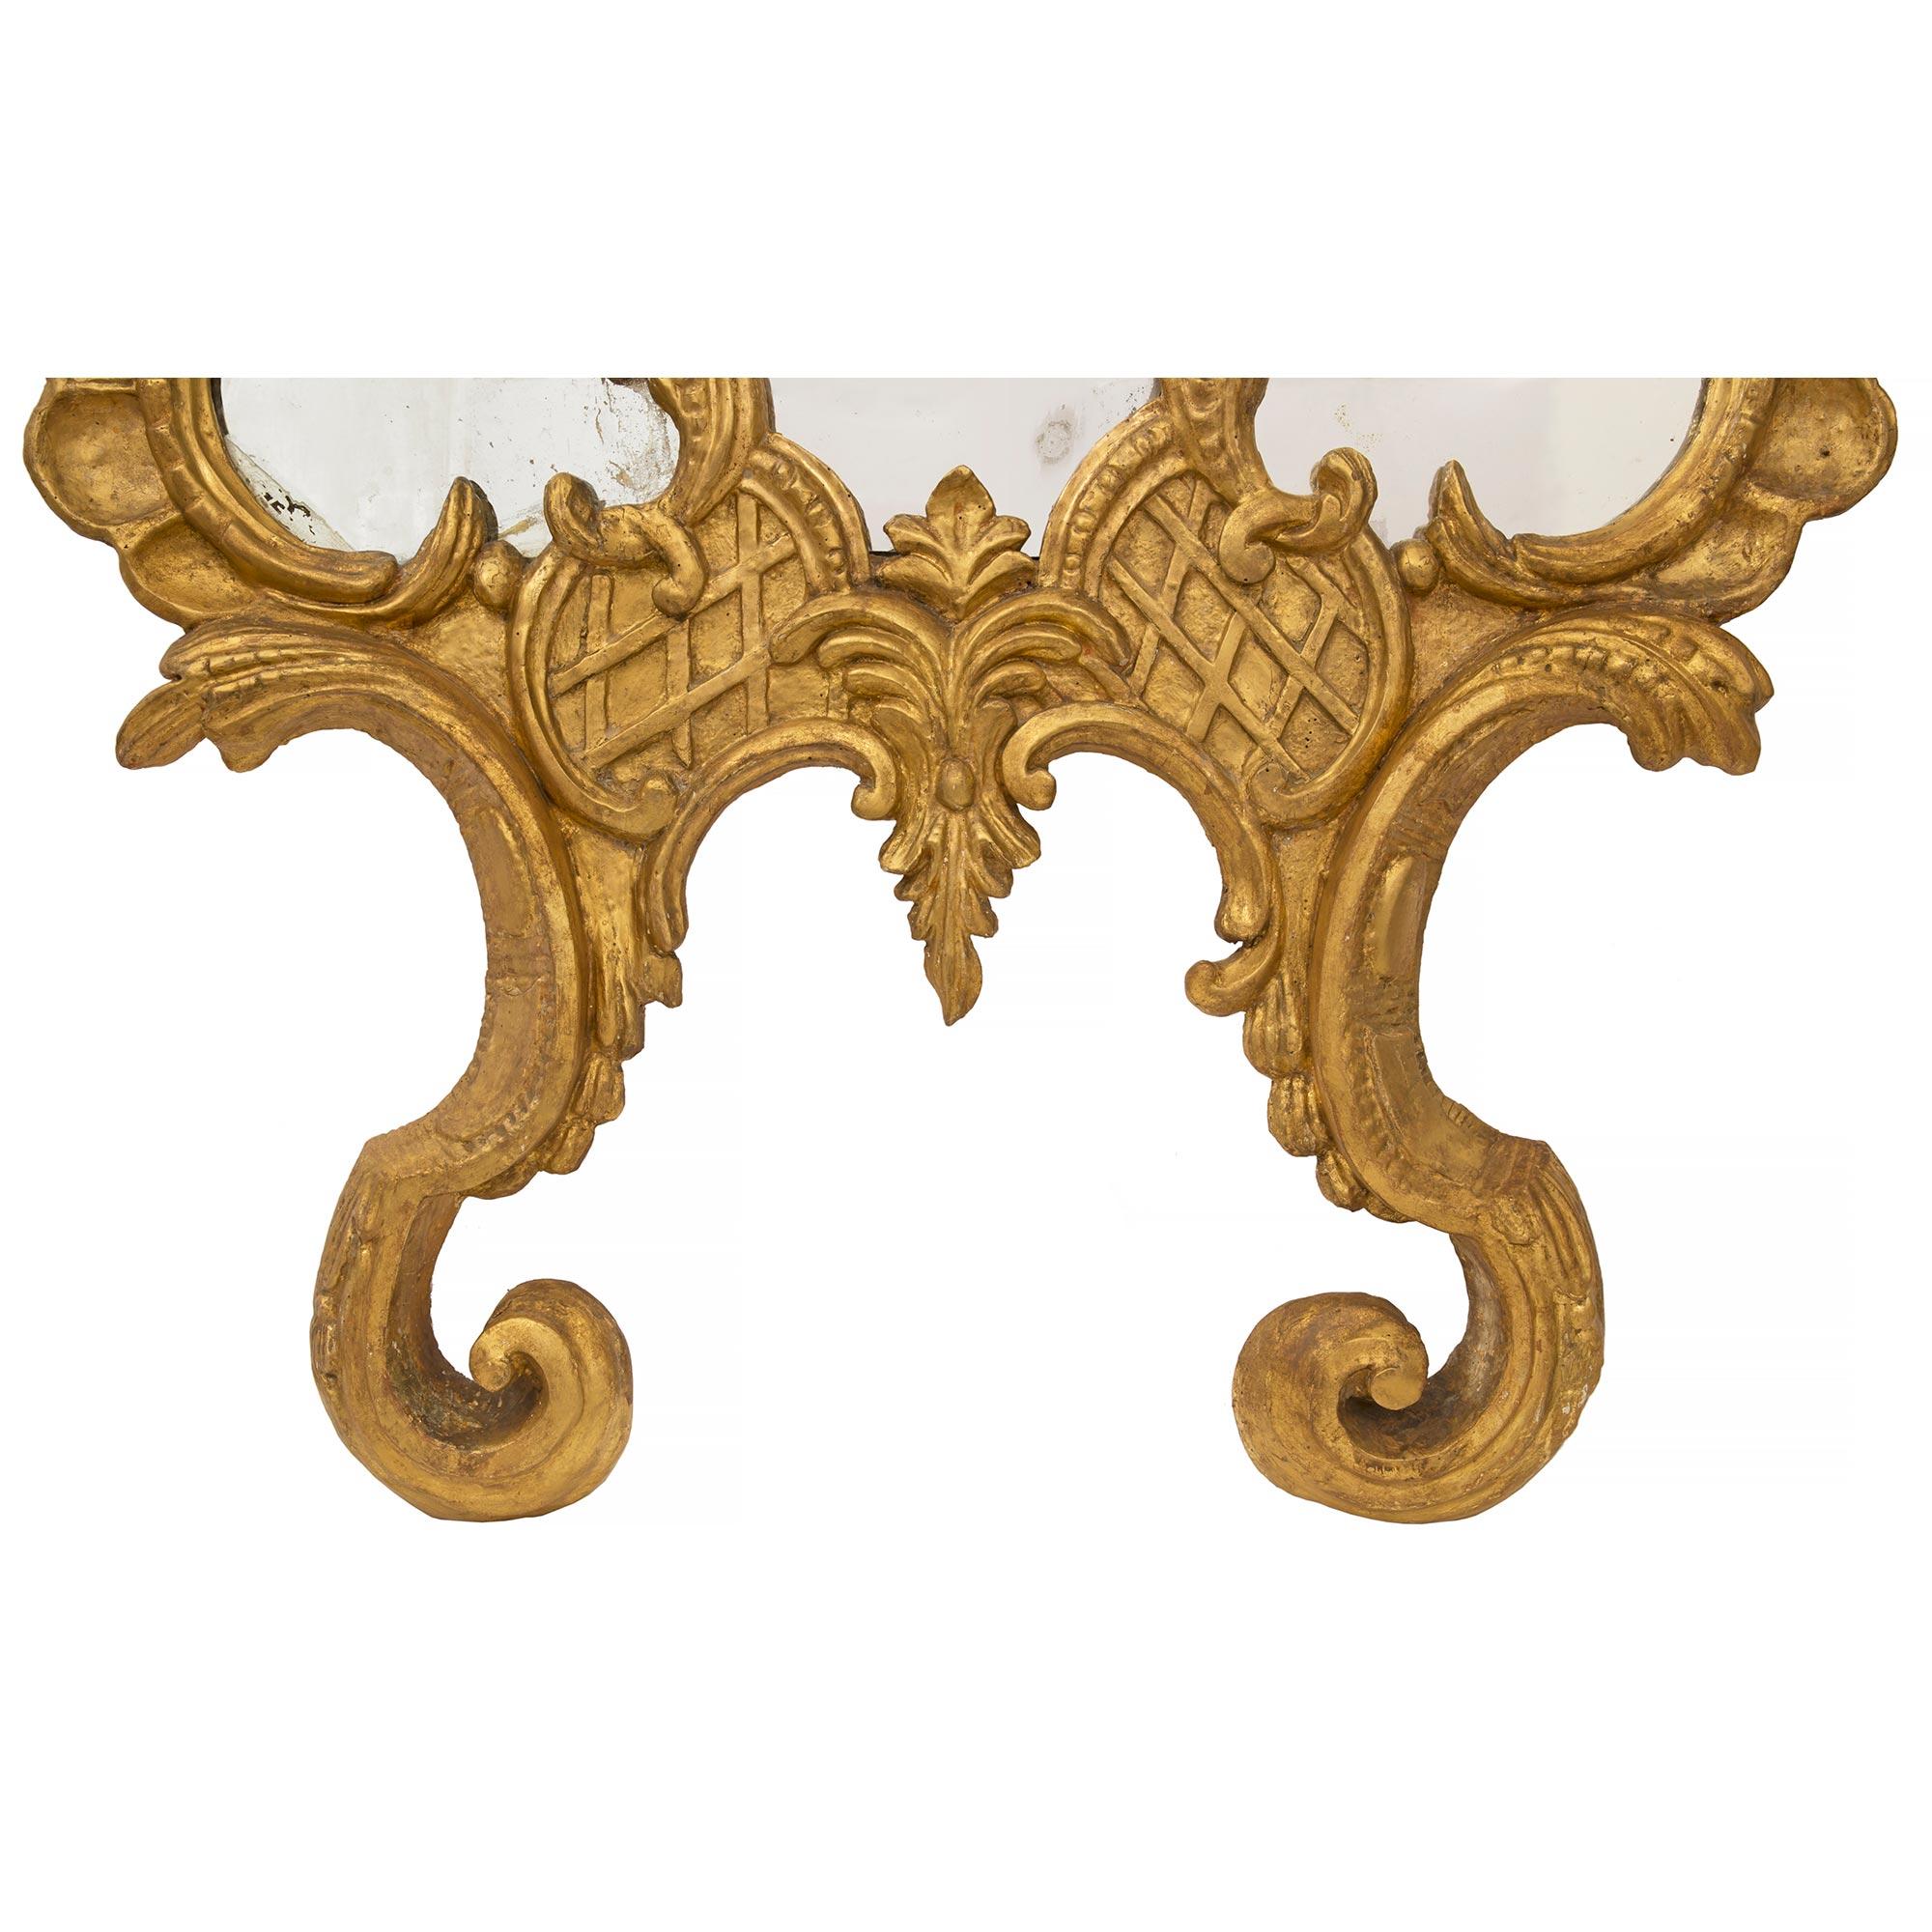 Pair of Italian Mid-18th Century, Mirrored Giltwood Baroque Sconces For Sale 5